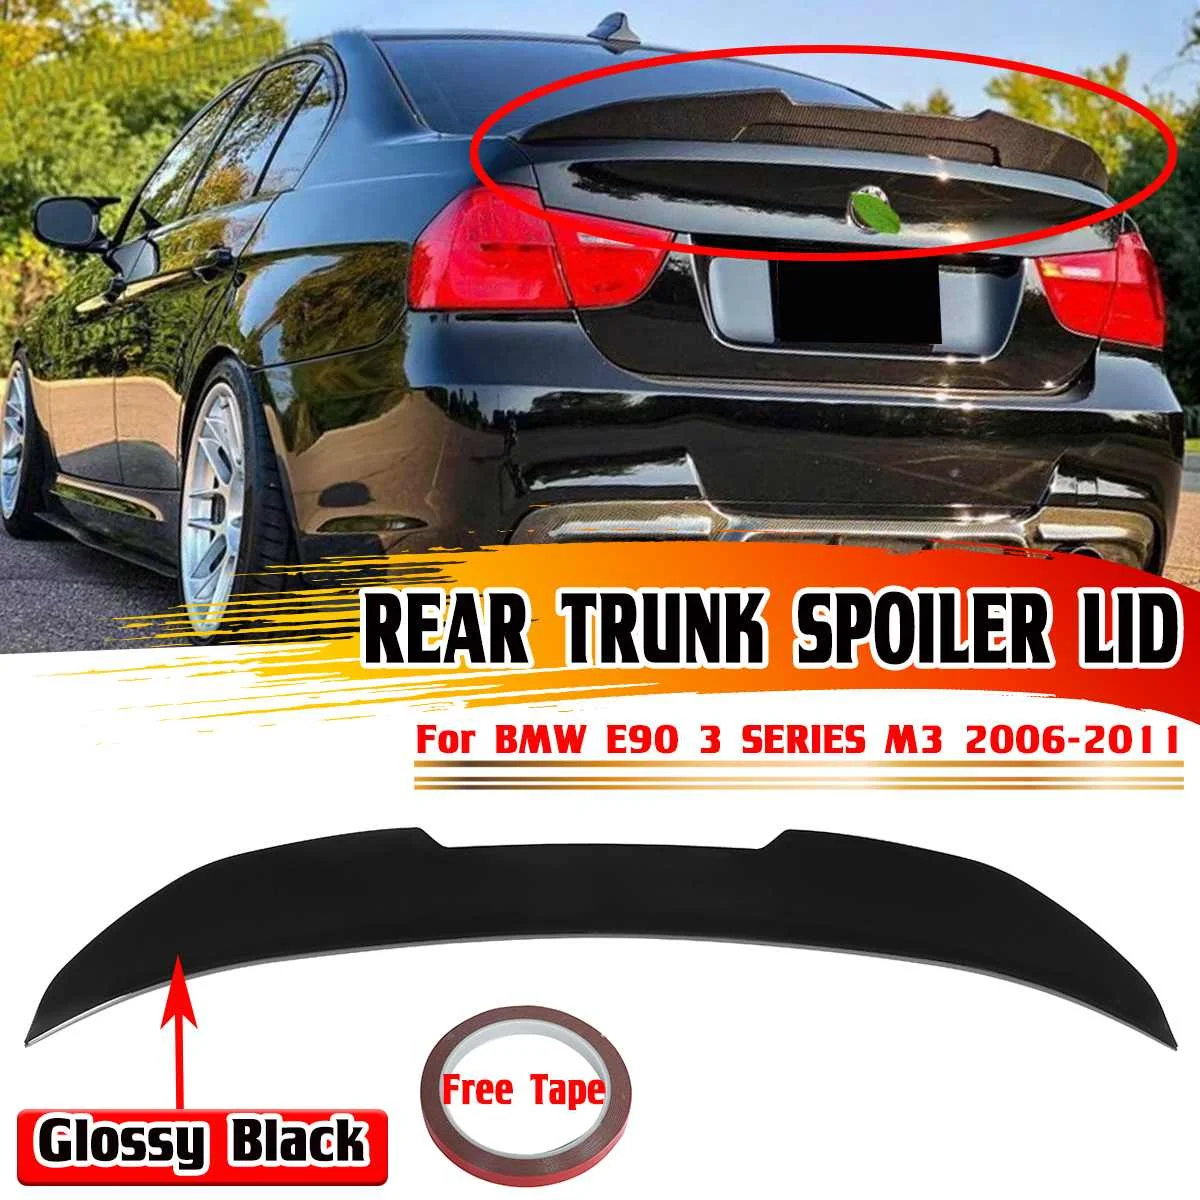 High Quality Car Rear Spoiler Wing Lip Extension For BMW E90 3 SERIES M3 2006-2011 Rear Trunk Spoiler Lip Boot Tailgate Wing Lip